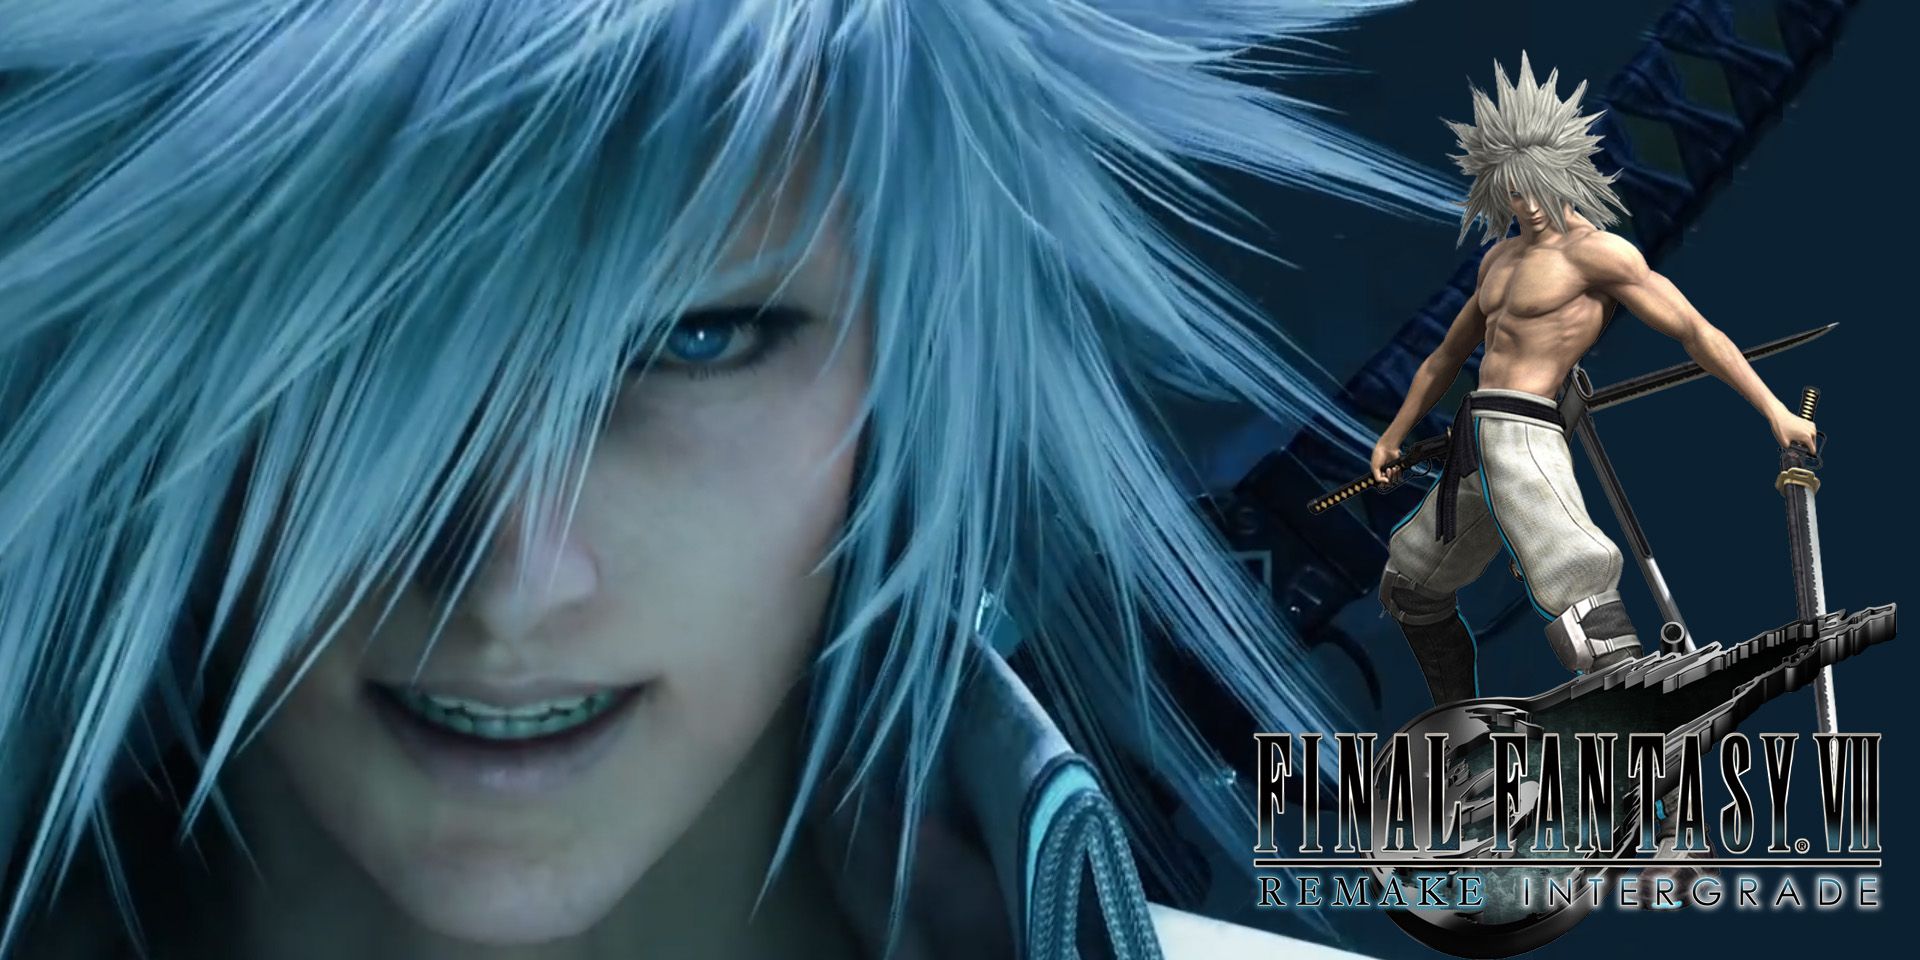 Weiss Explained Everything You Need To Know About FF7R Intergrades Mysterious WhiteHaired Antagonist